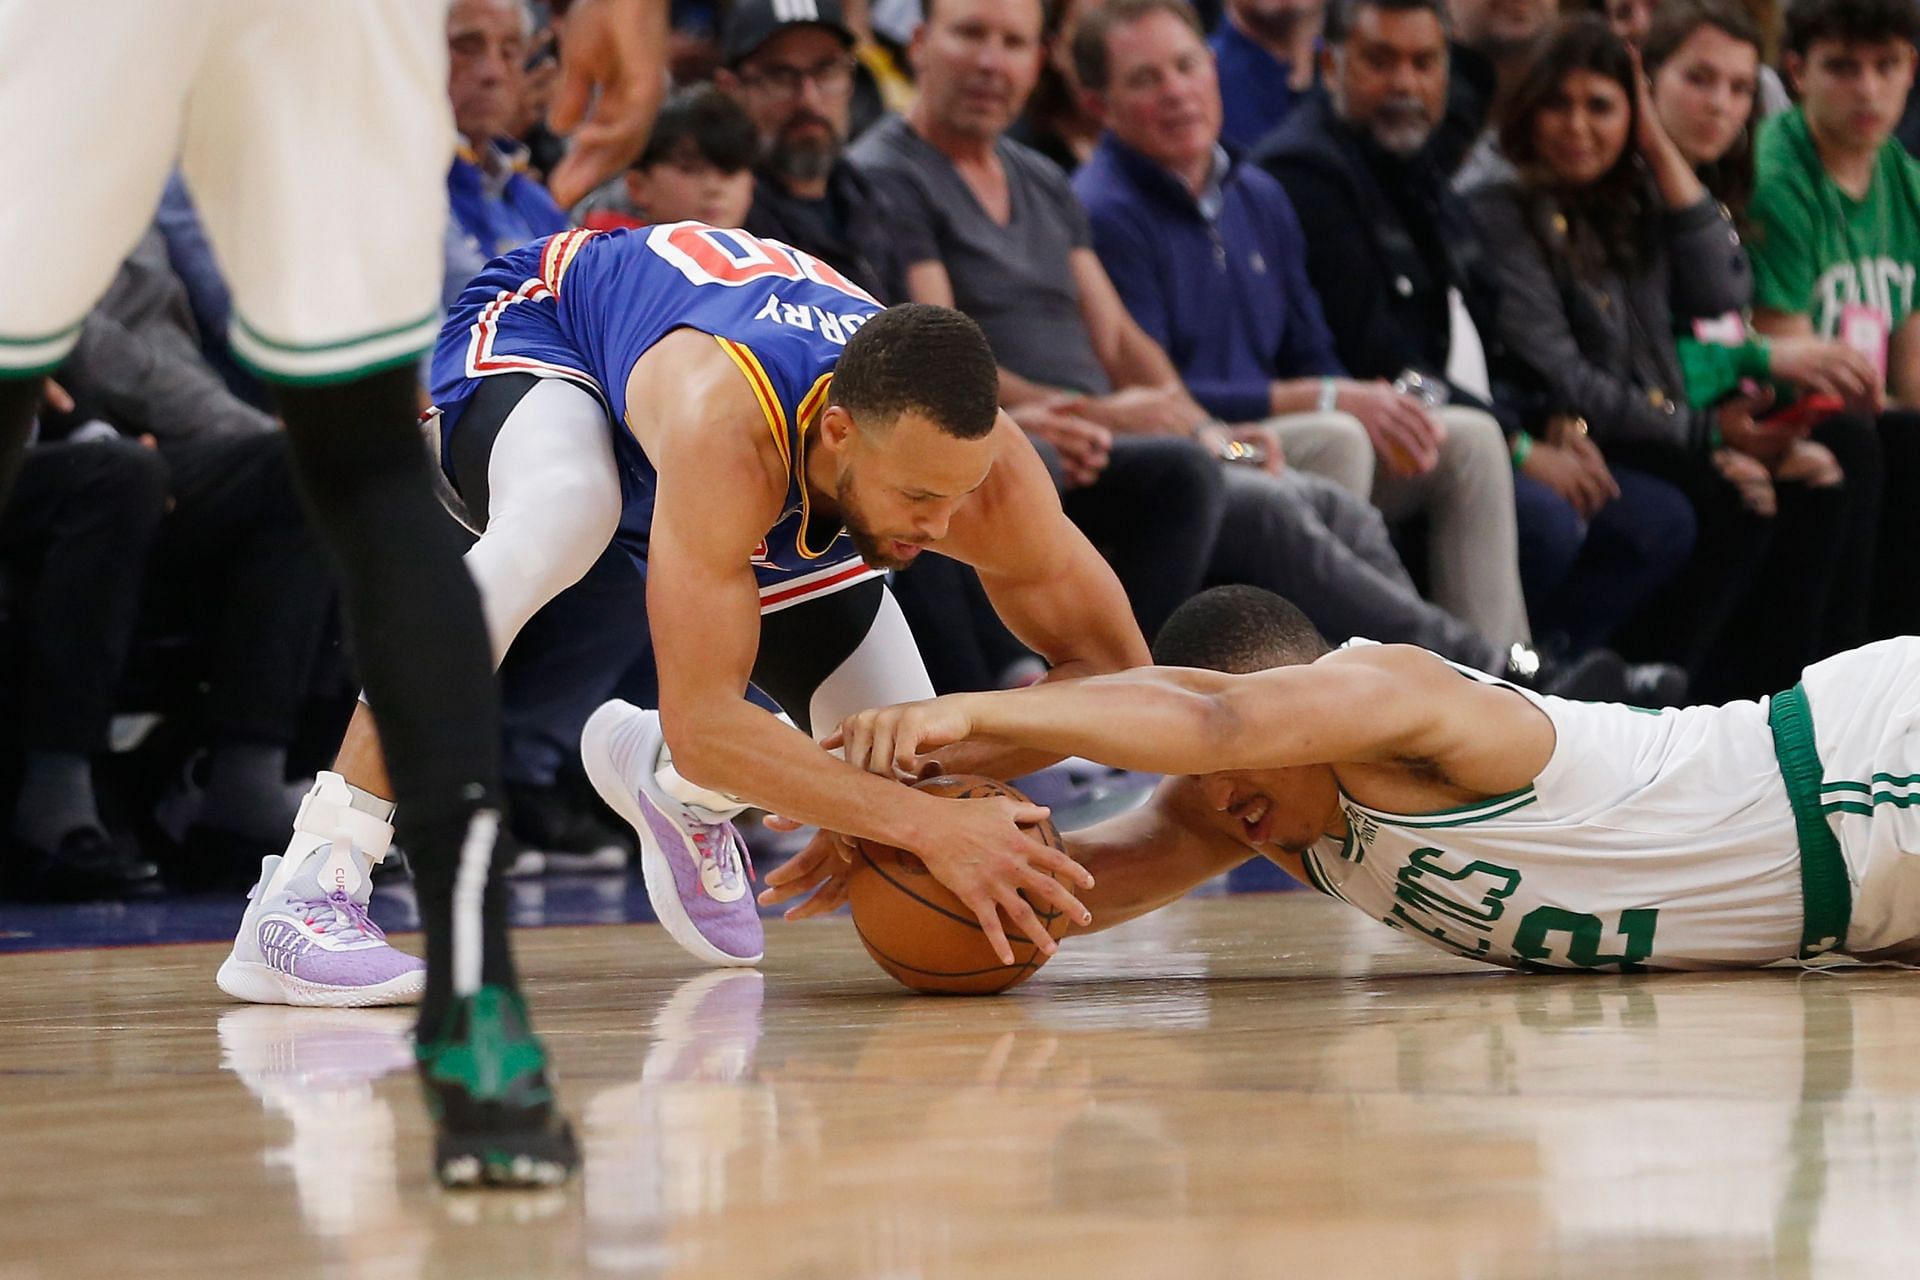 Steph Curry #30 of the Golden State Warriors competes for a loose ball against Grant Williams #12 of the Boston Celtics